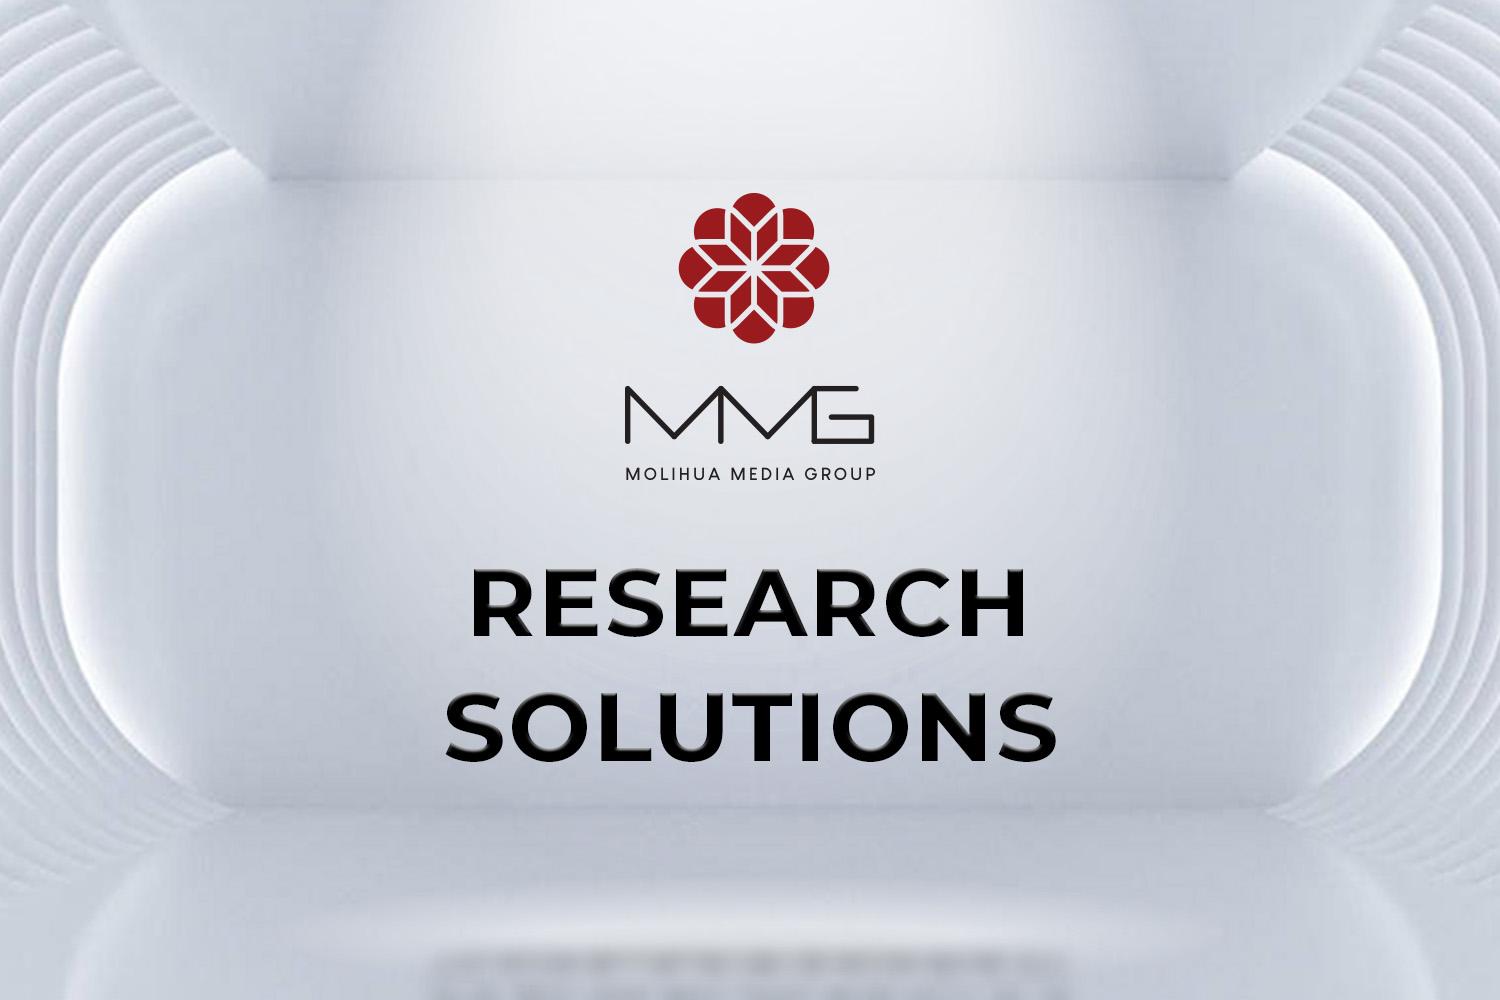 Research solutions